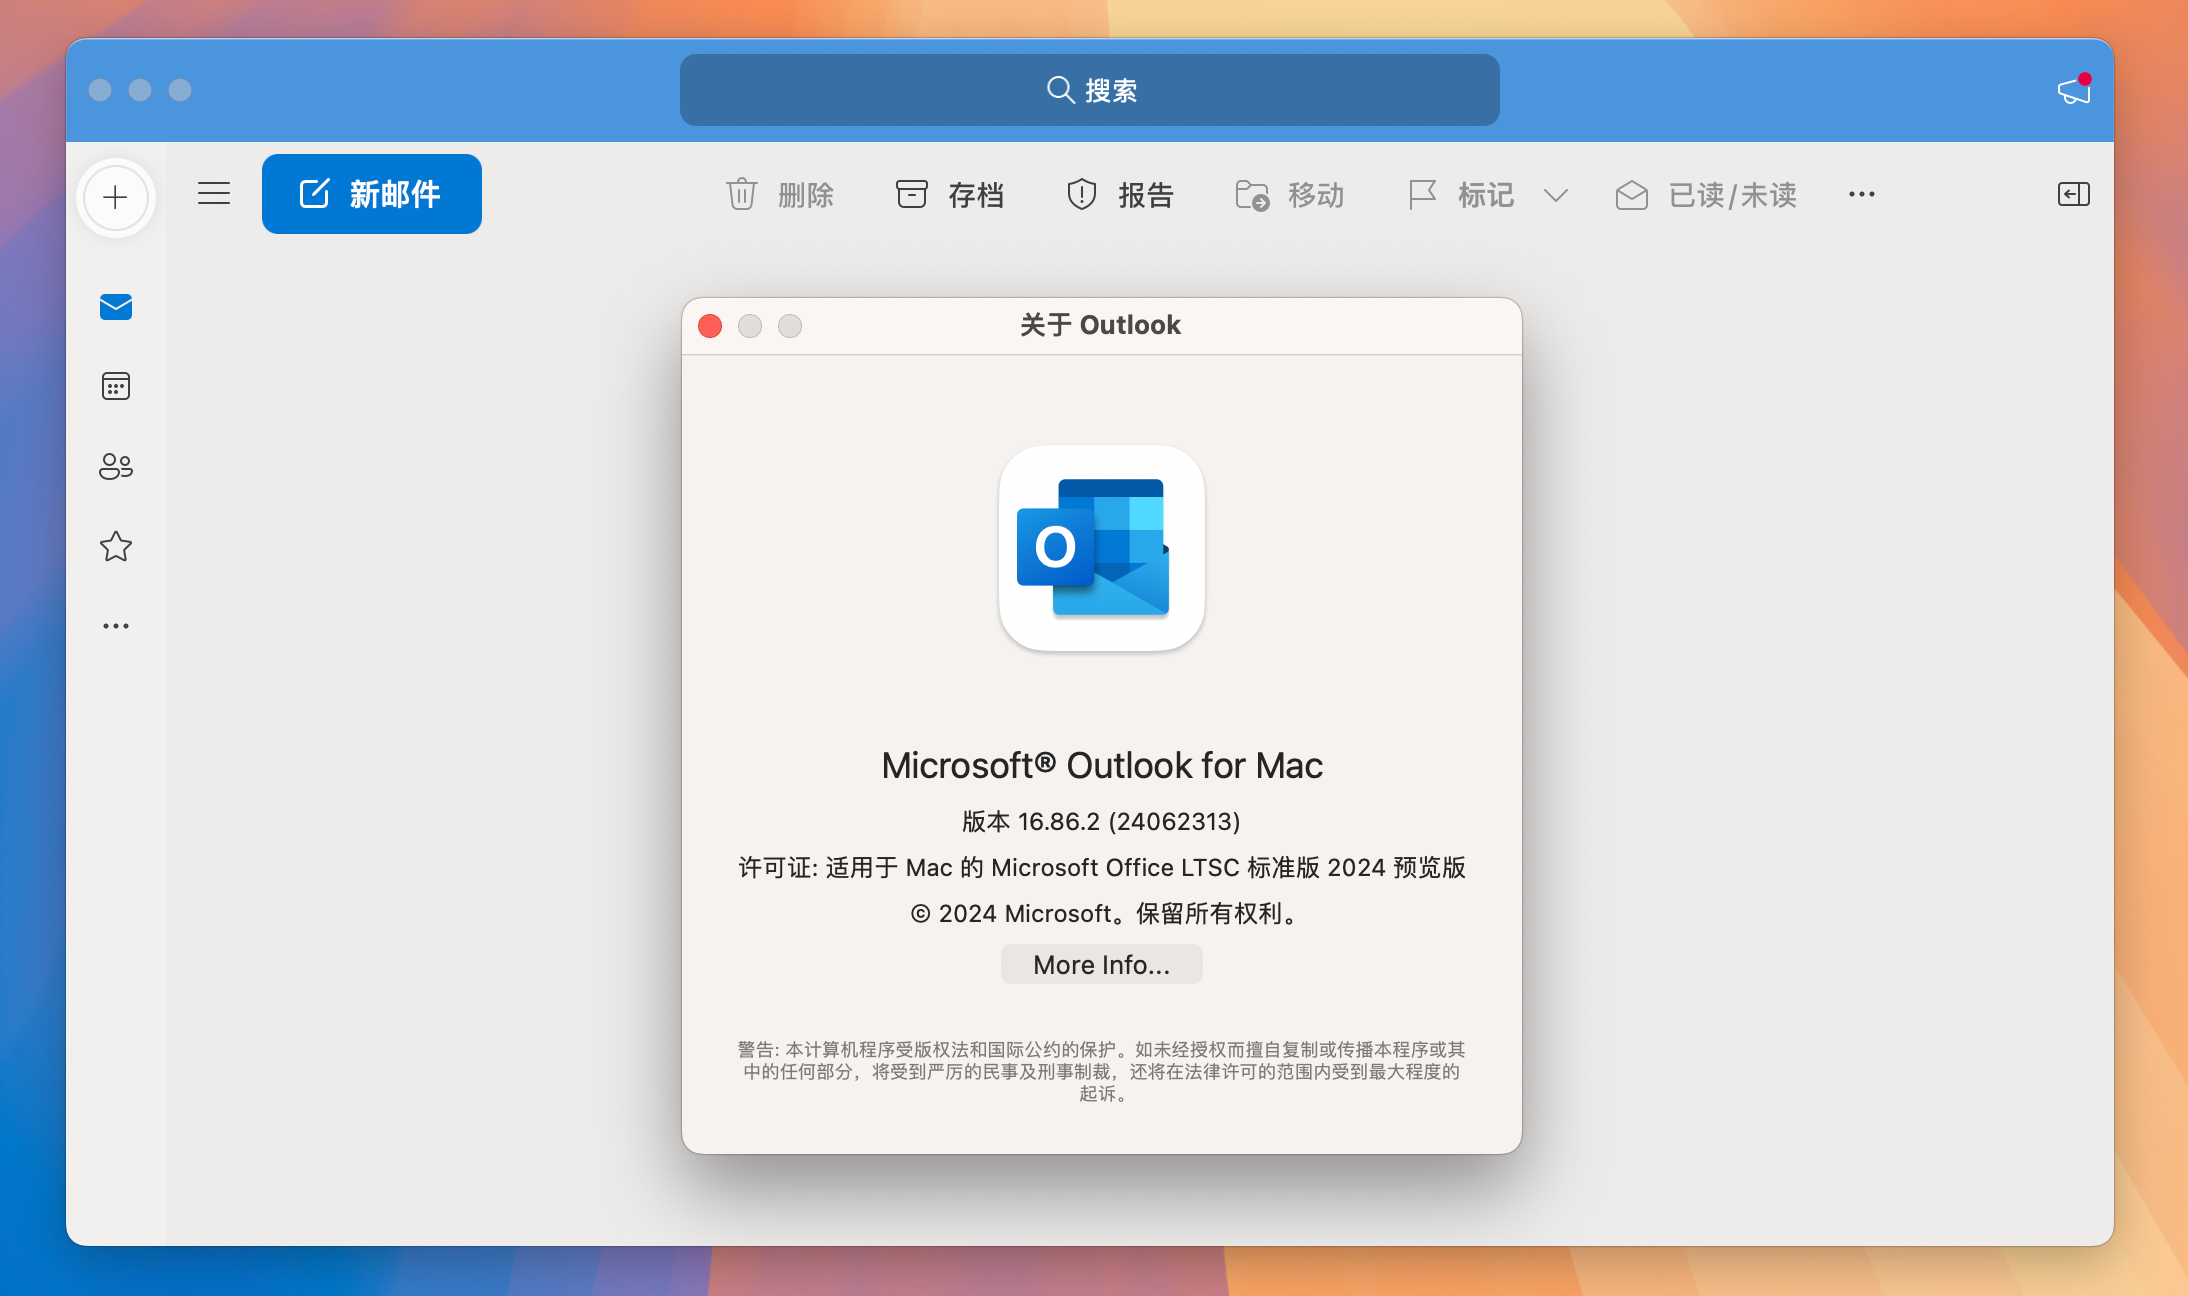 Microsoft Outlook LTSC 2021 for Mac v16.86.2 outlook邮箱 免激活下载-1